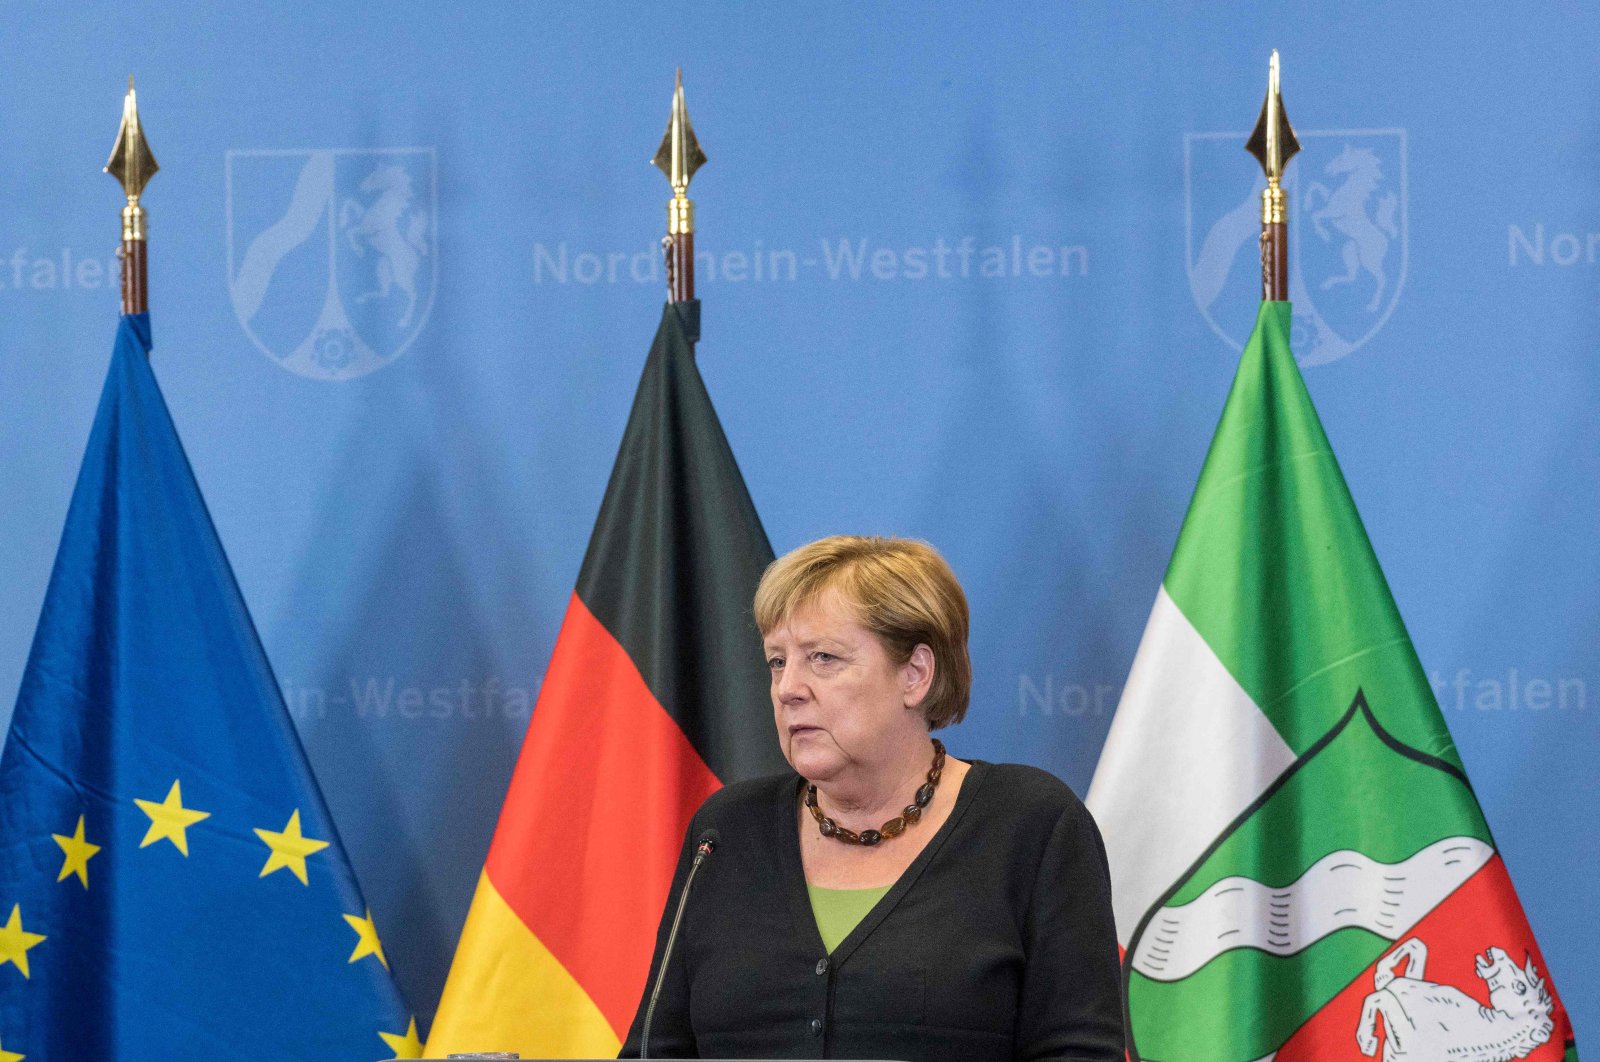 German Chancellor Angela Merkel looks on as she addresses a joint press conference with the North Rhine-Westphalia's State Premier and Germany's conservative Christian Democratic Union's (CDU) chancellor candidate after visiting flood-hit regions in Hagen, North Rhine-Westphalia, western Germany, Sept. 5, 2021. (AFP Photo)